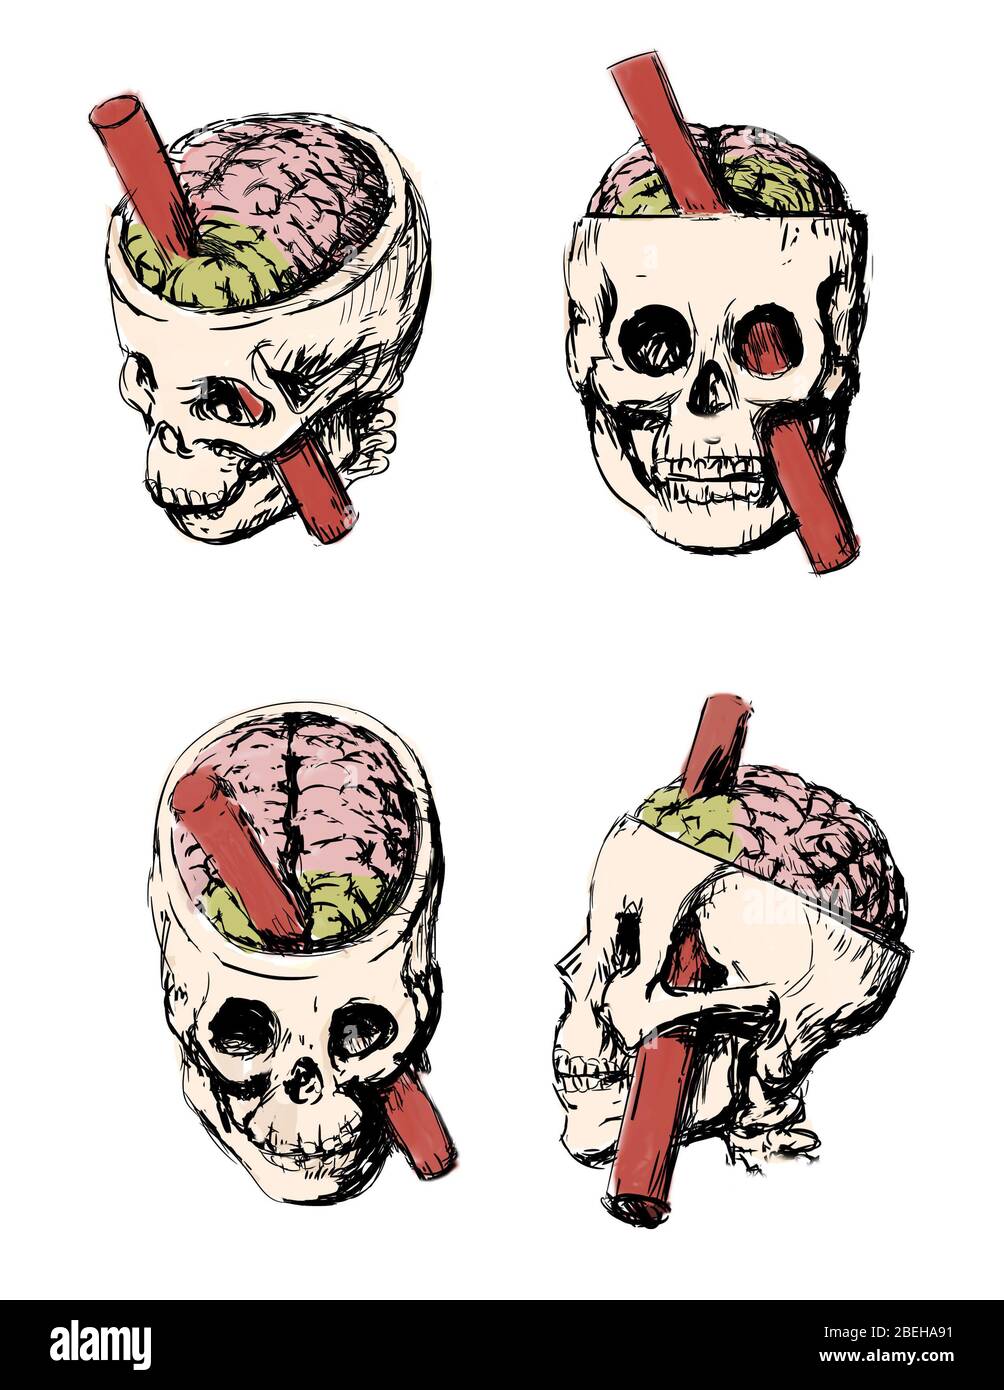 An illustration of the brain injury of Phineas Gage. Phineas P. Gage, 1823-1860, was an American railroad worker who survived an accident in 1848 in which a large iron rod was driven through his head. The iron rod destroyed most of his left frontal lobe. The effects of the injury on his personality have been much debated as there is scant written evidence of what his behavior actually was for the twelve remaining years of his life. Stock Photo